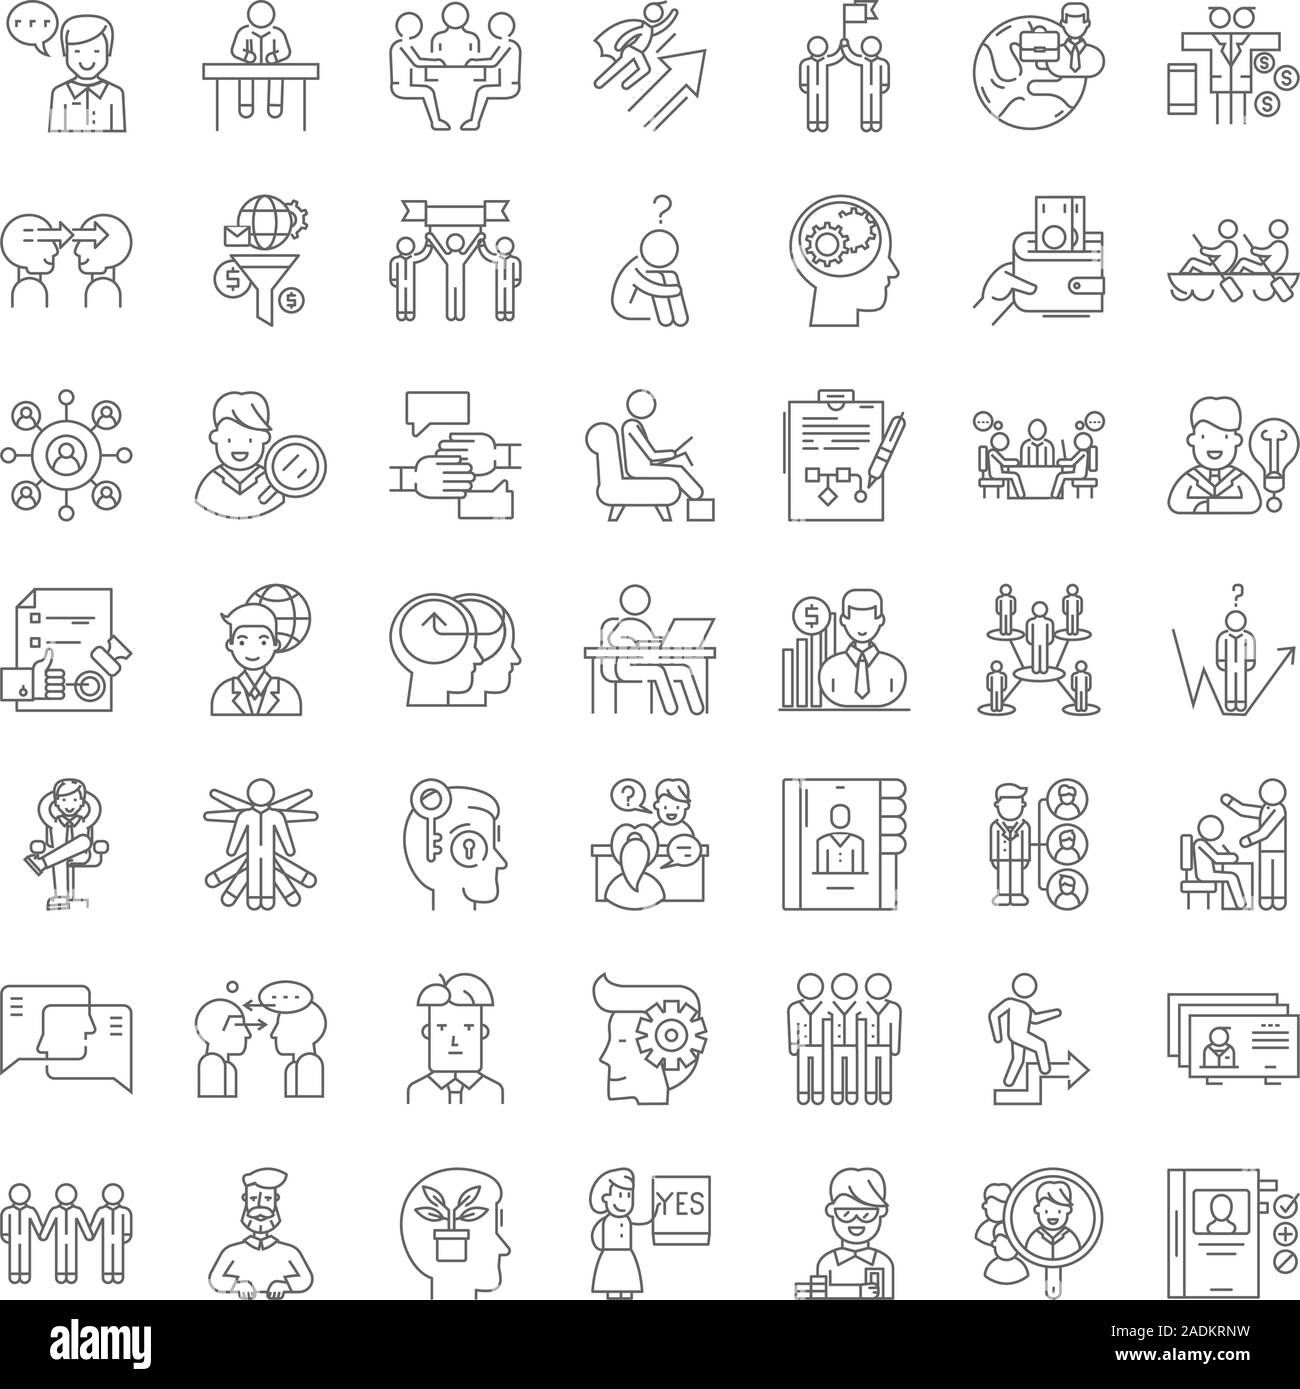 Mentality linear icons, signs, symbols vector line illustration set Stock Vector